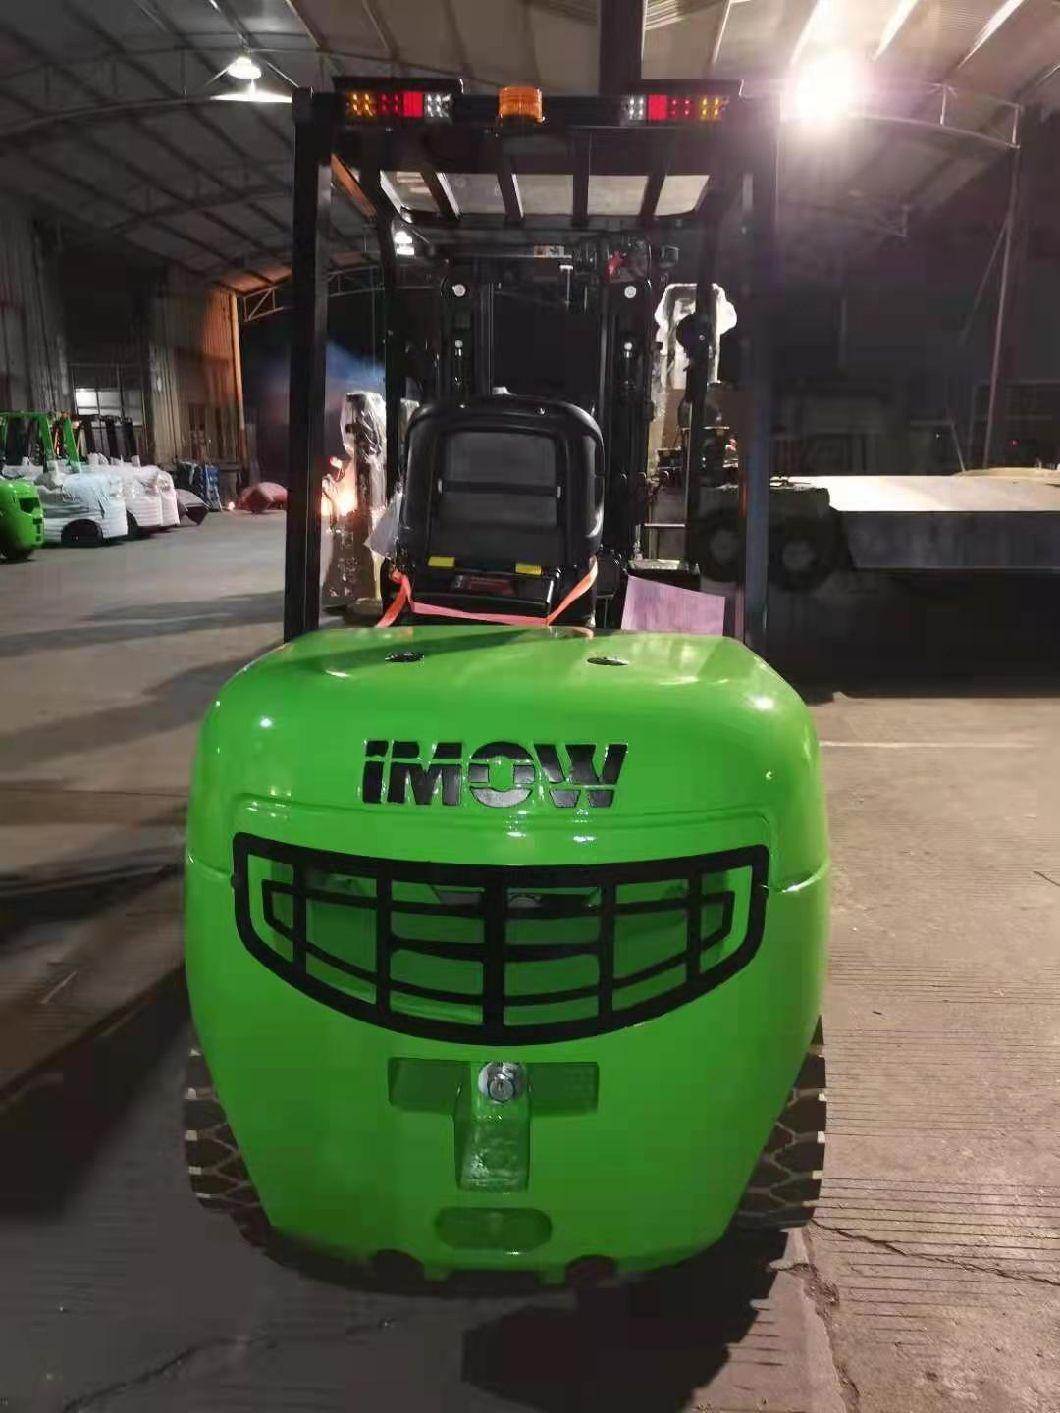 Ice301 3t Imow Battery Operated Electric Price Forklift for Sale